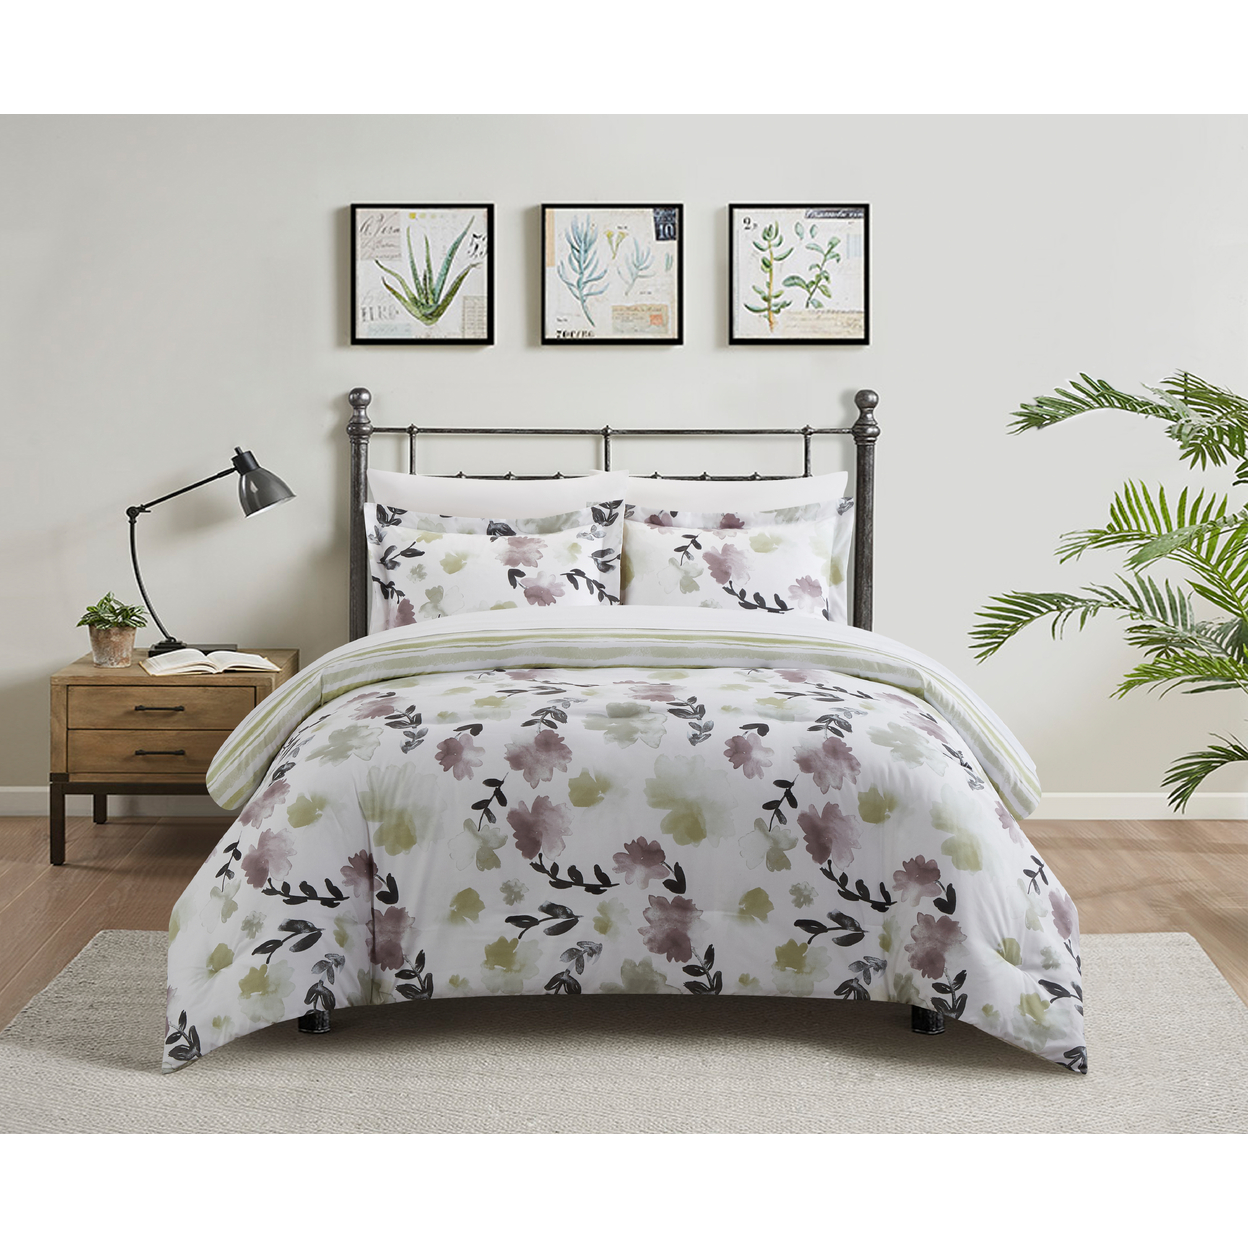 3 Or 2 Piece Duvet Cover Set Print Design With Zipper Closure - Everly Green, Twin